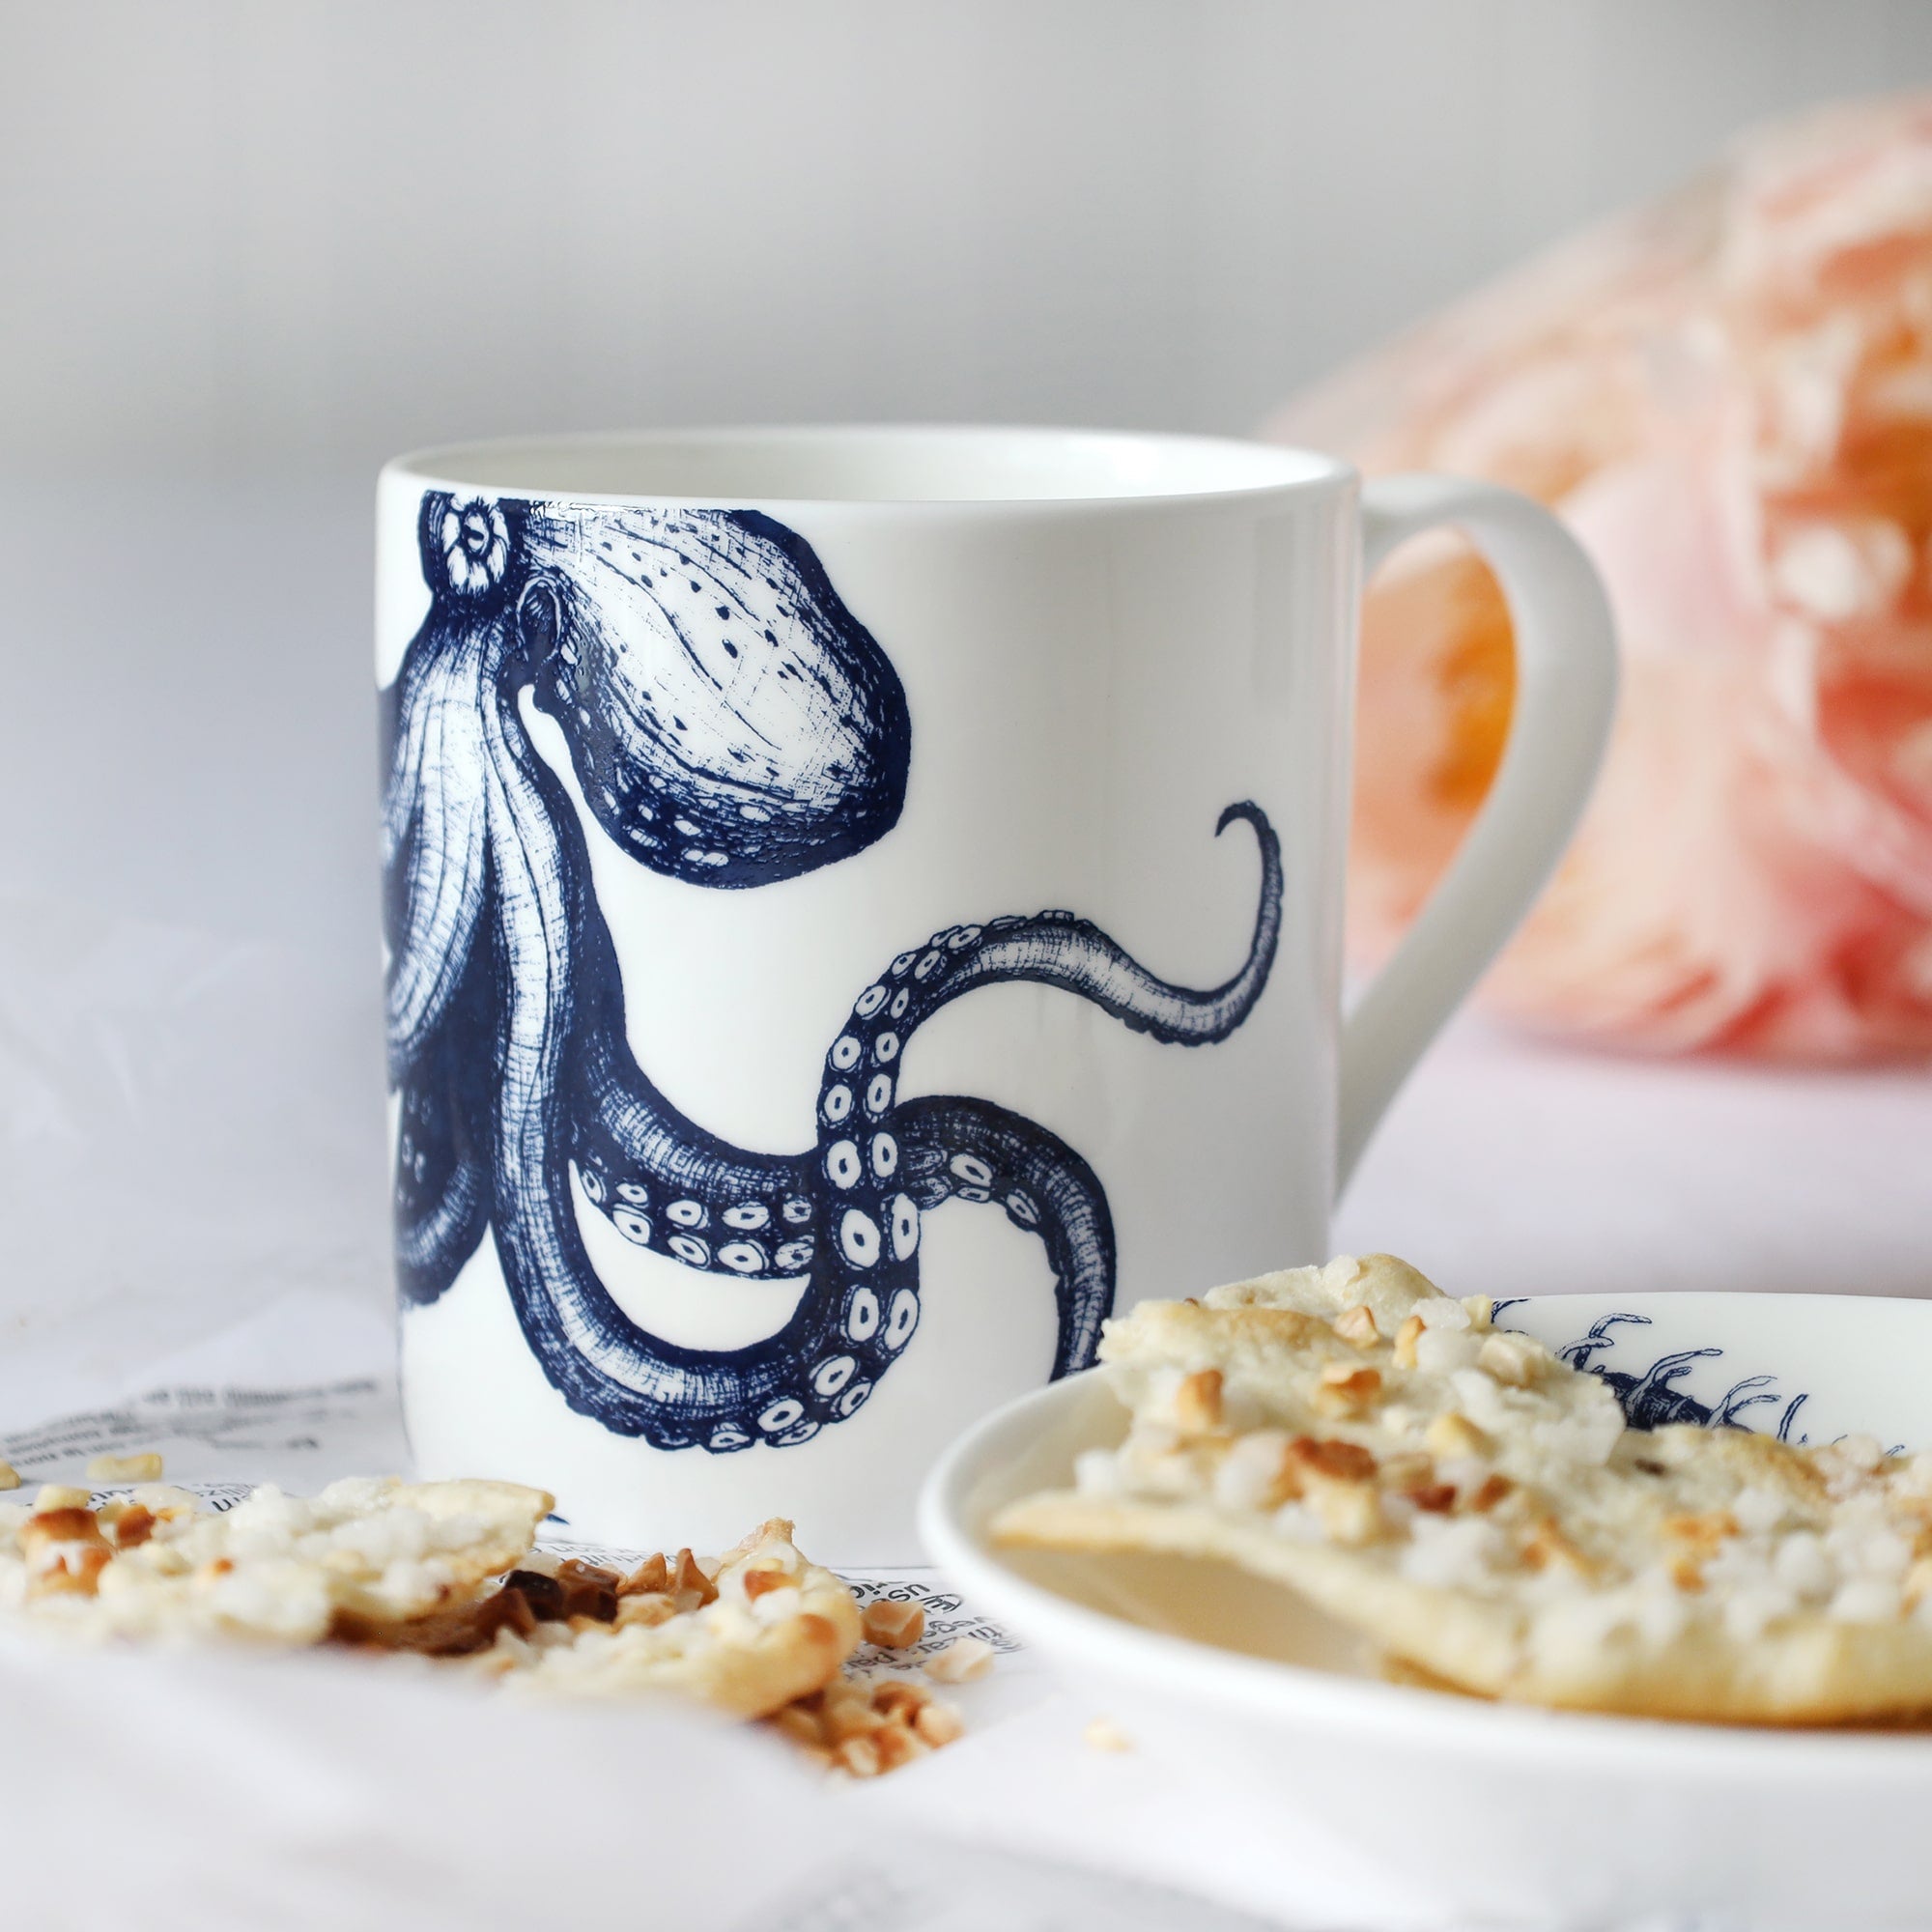 White mug with dark blue octopus illustration sitting on a table with a plate & biscuits and flowers in the background.